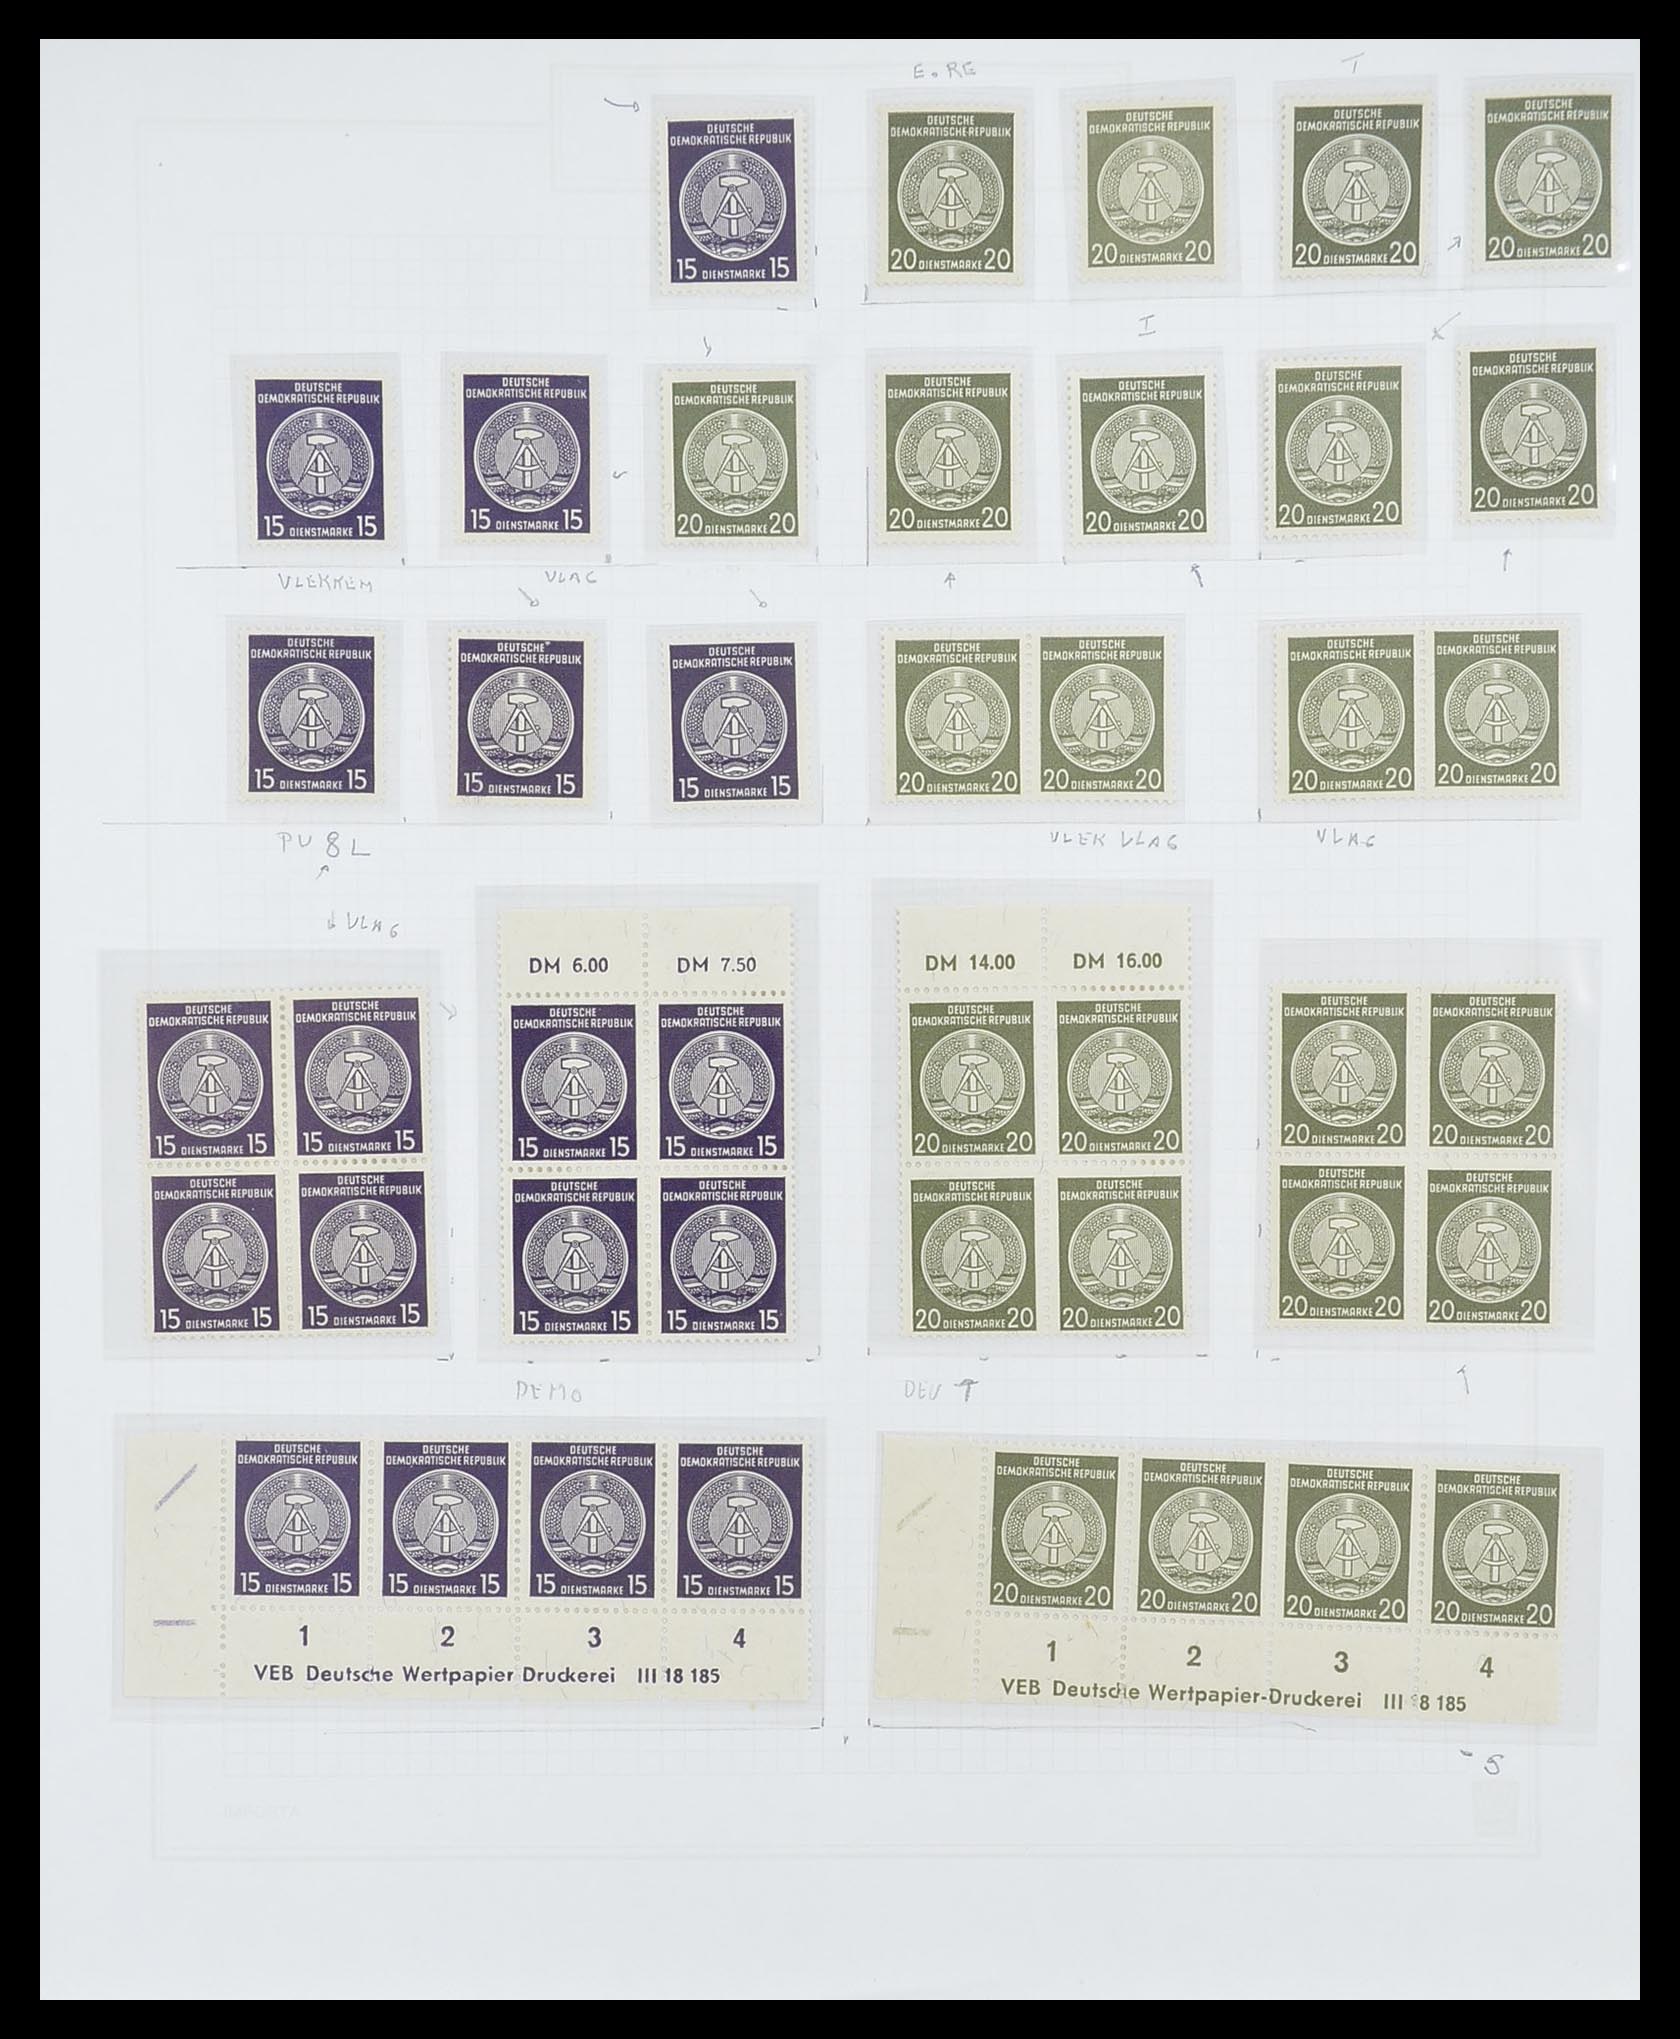 33821 077 - Stamp collection 33821 DDR service.